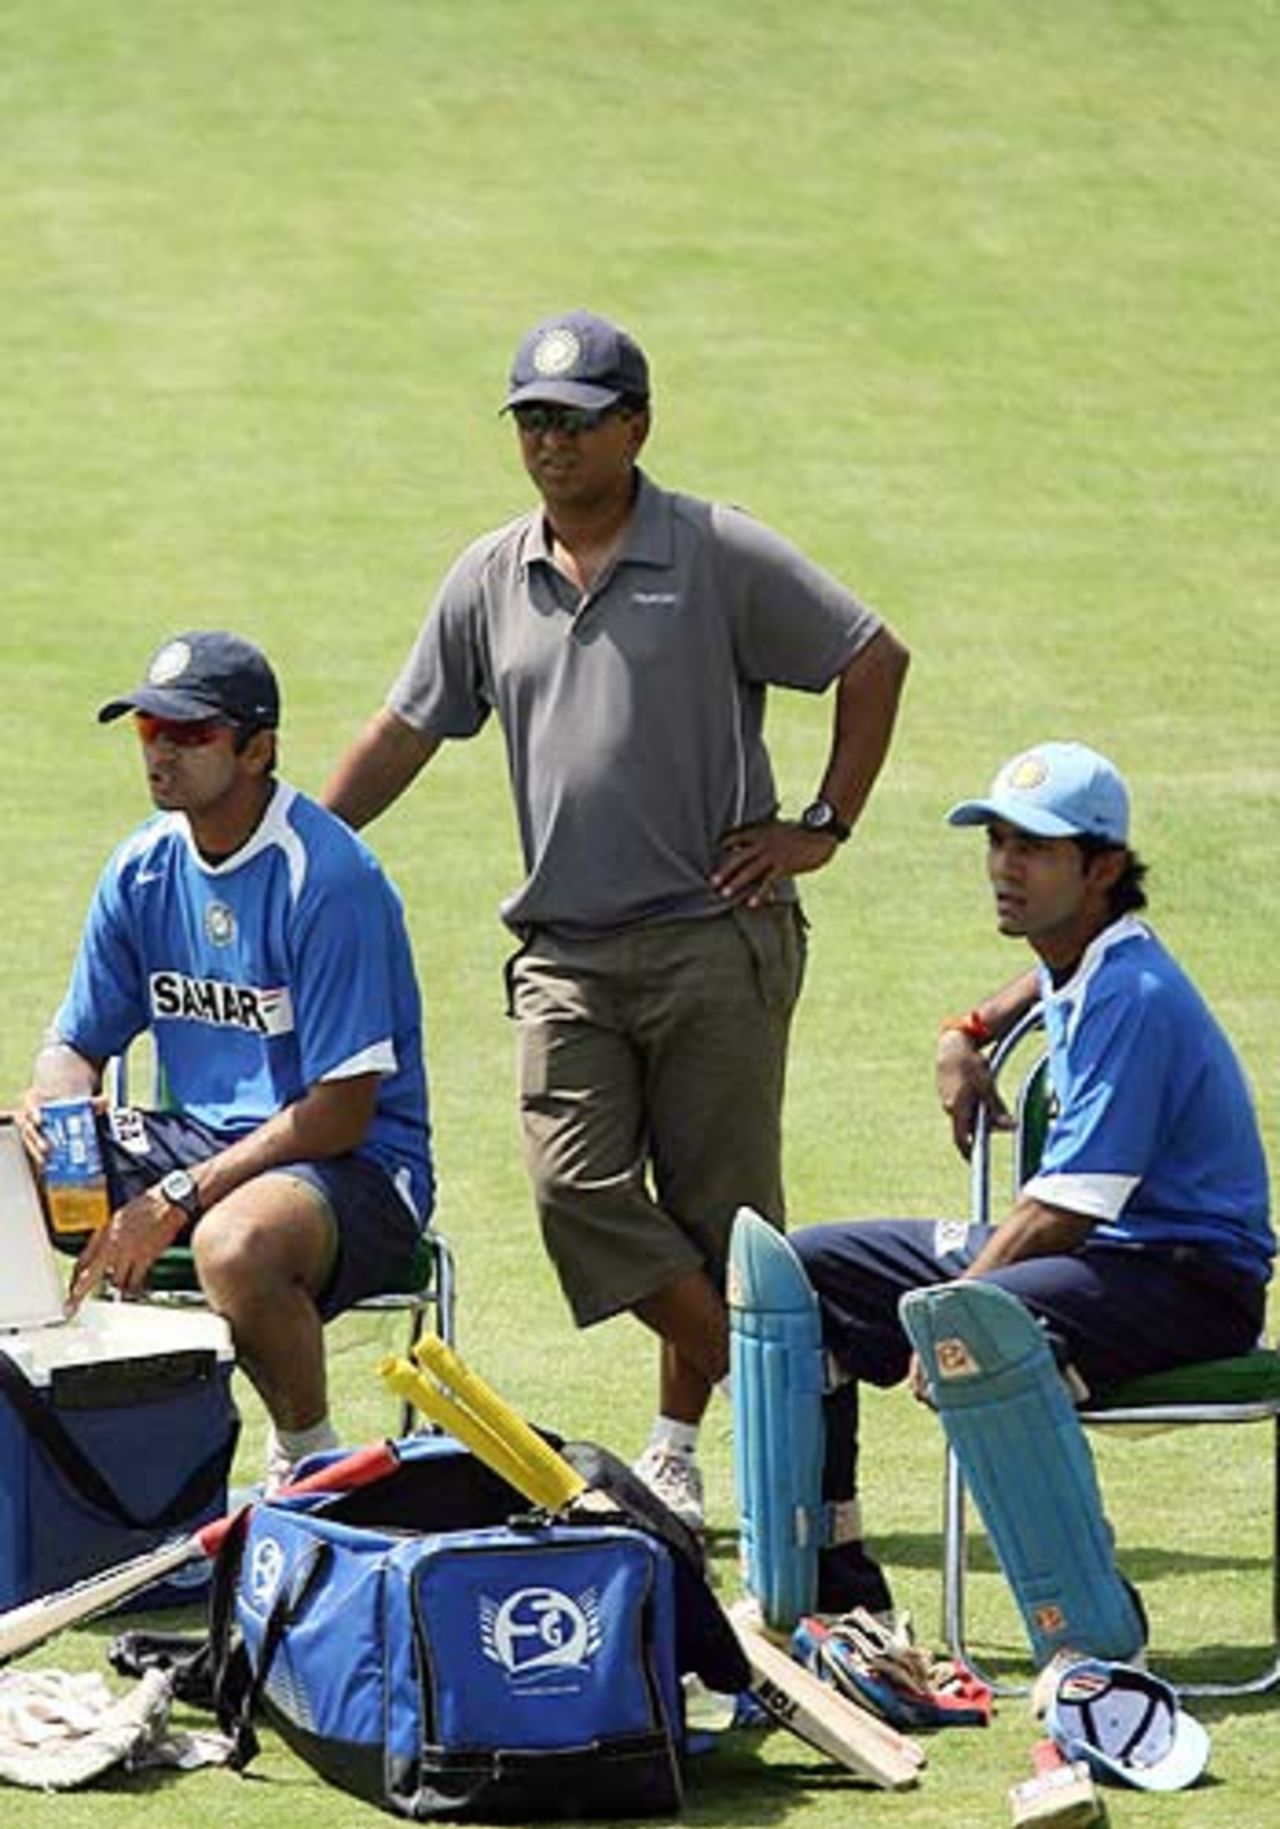 Kiran More oversees the practice session before the final ODI against England, India v England, 7th ODI, Indore, April 14, 2006